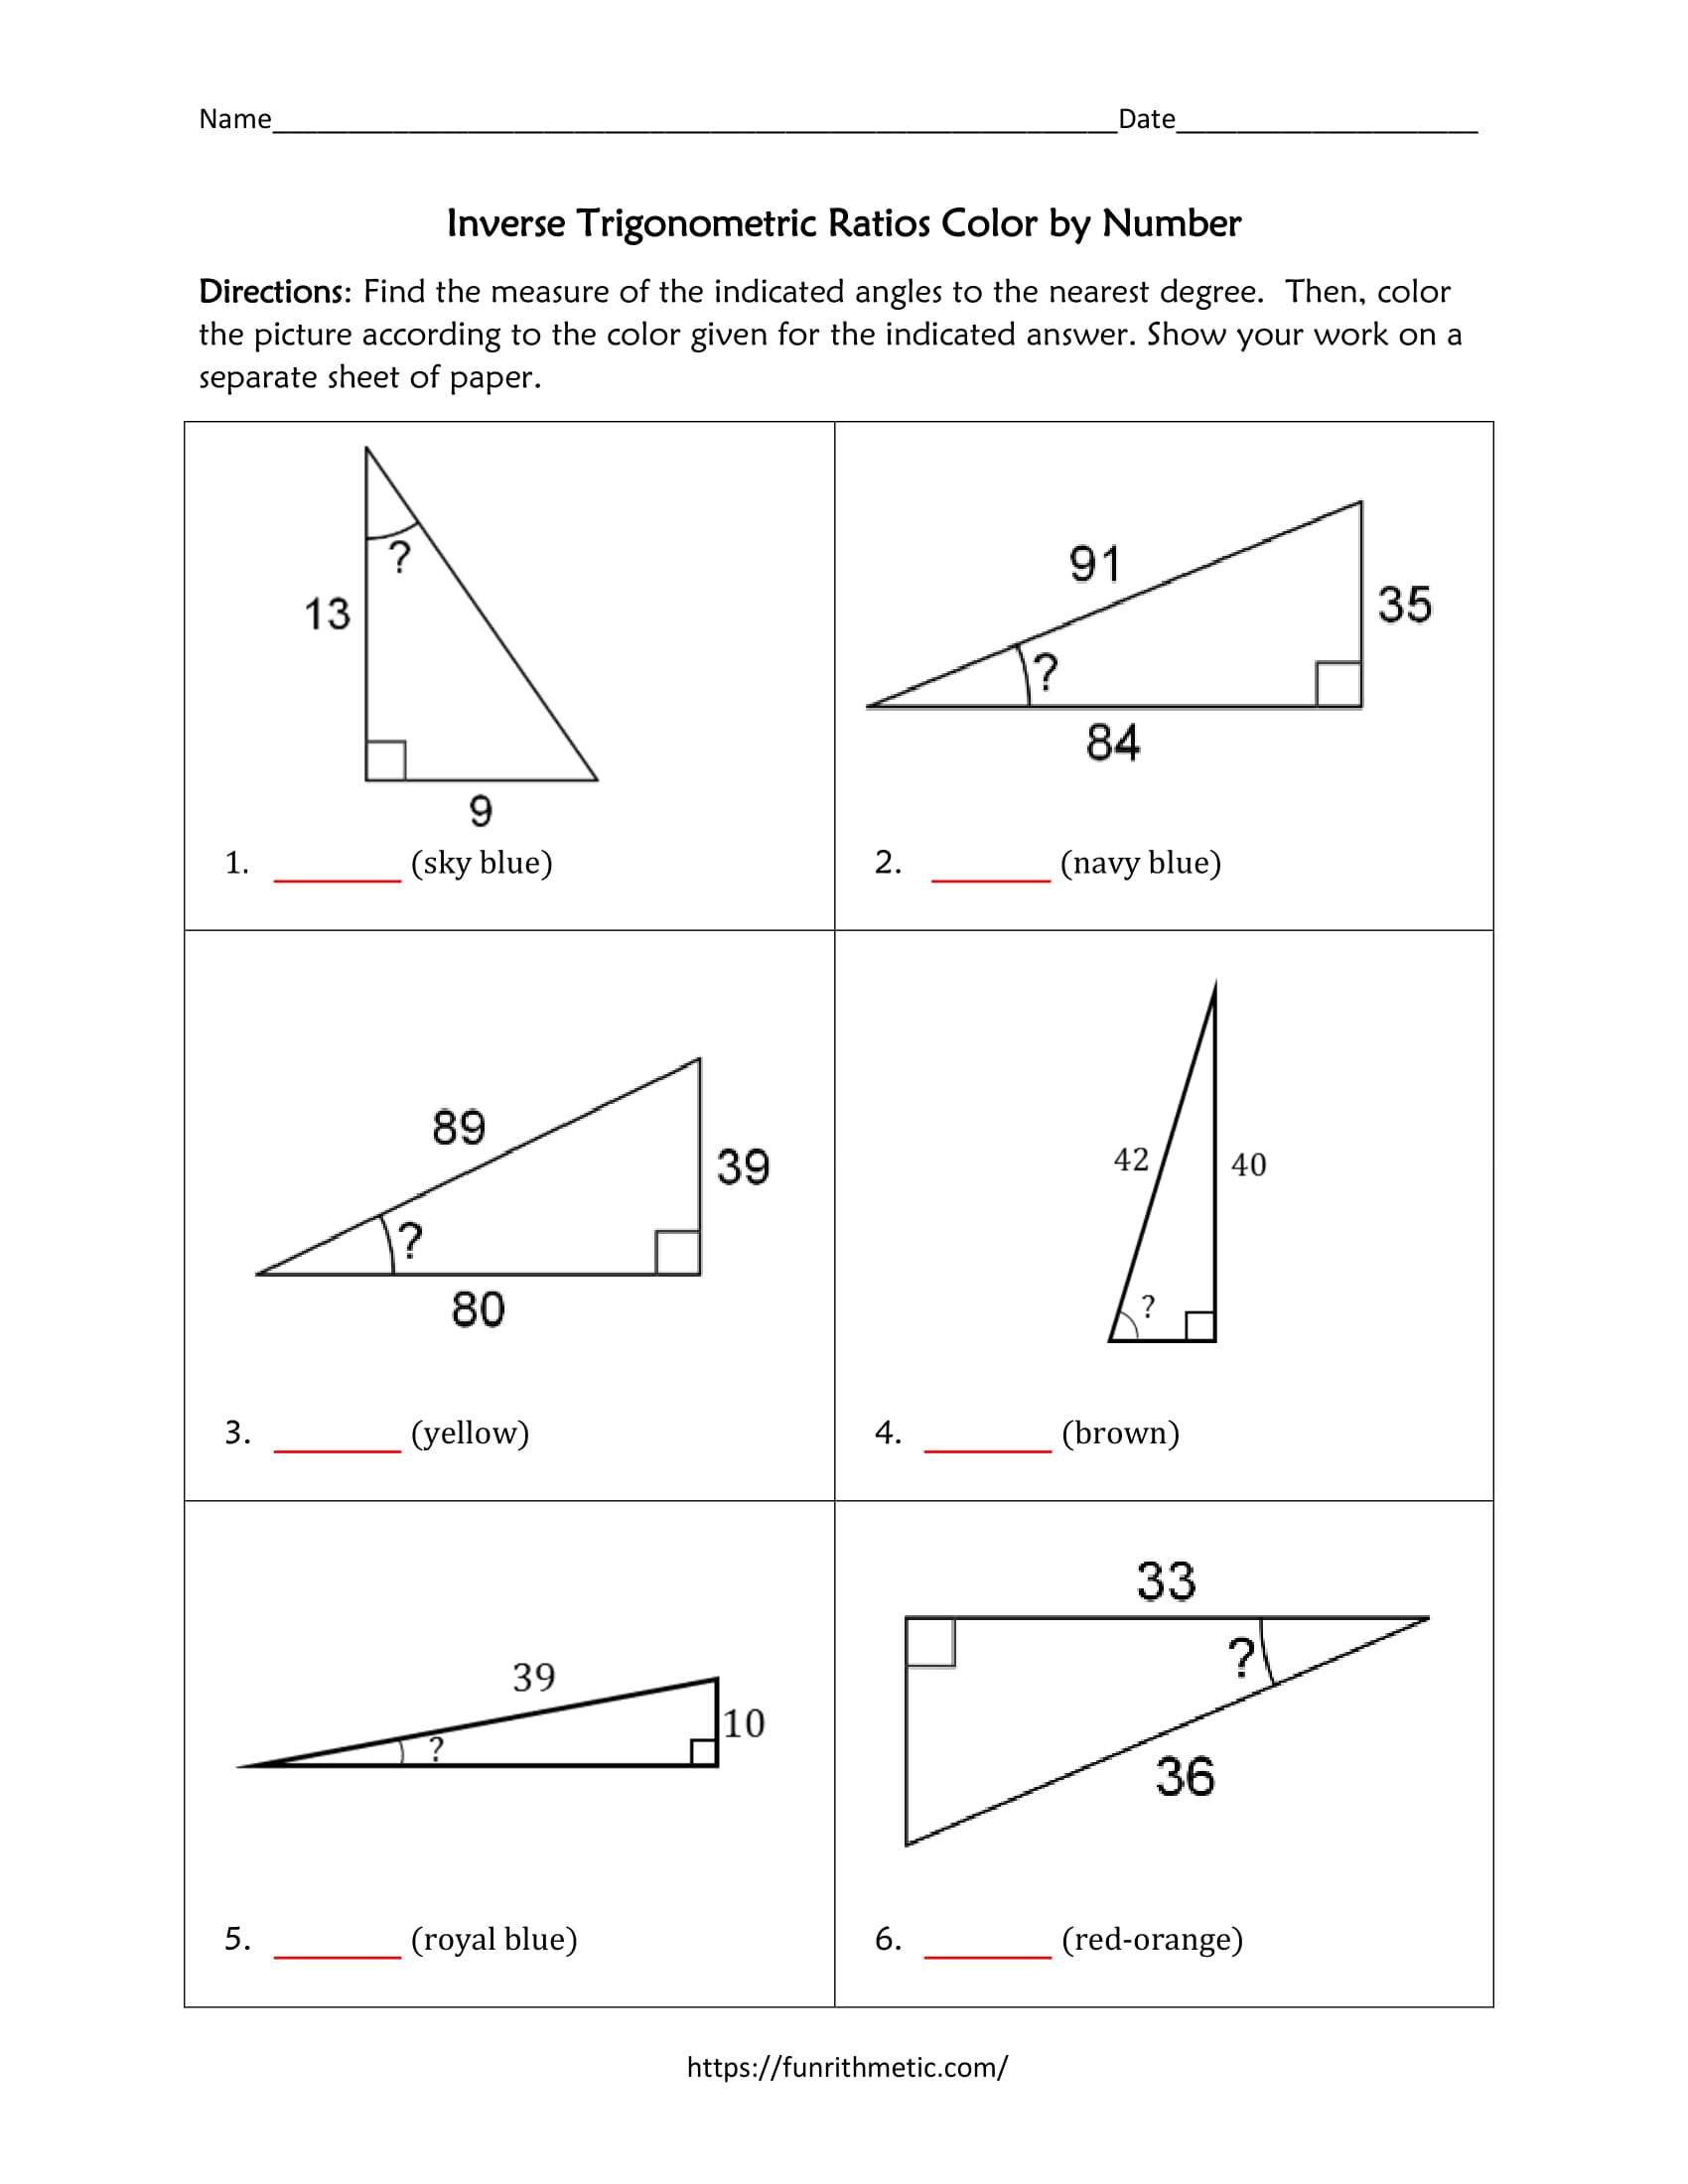 Inverse Trigonometric Ratios Color by Number In Trigonometric Ratios Worksheet Answers